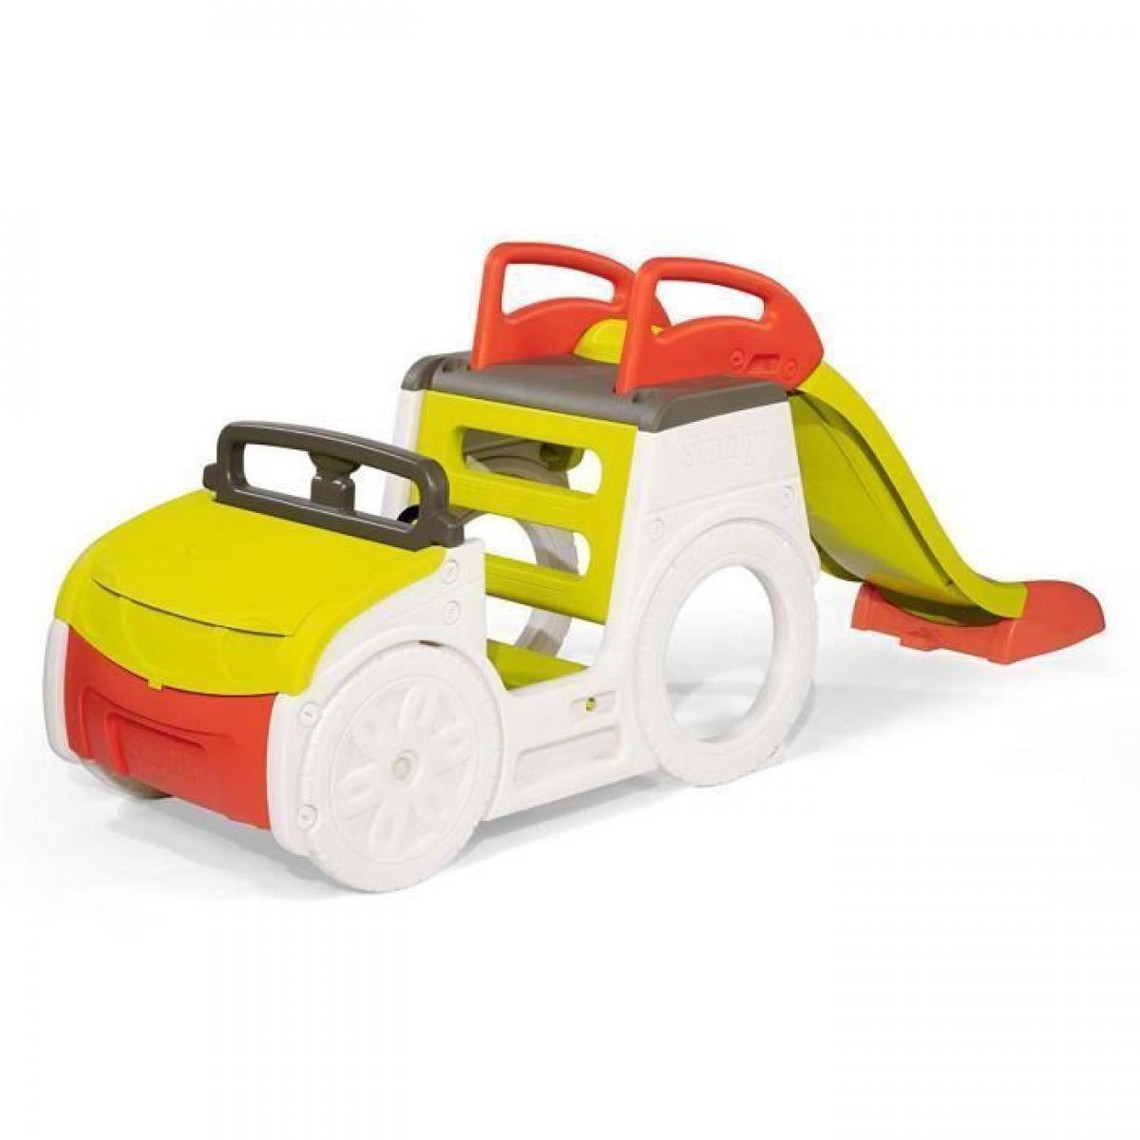 Smoby SMOBY - Adventure Car - Multi-activites